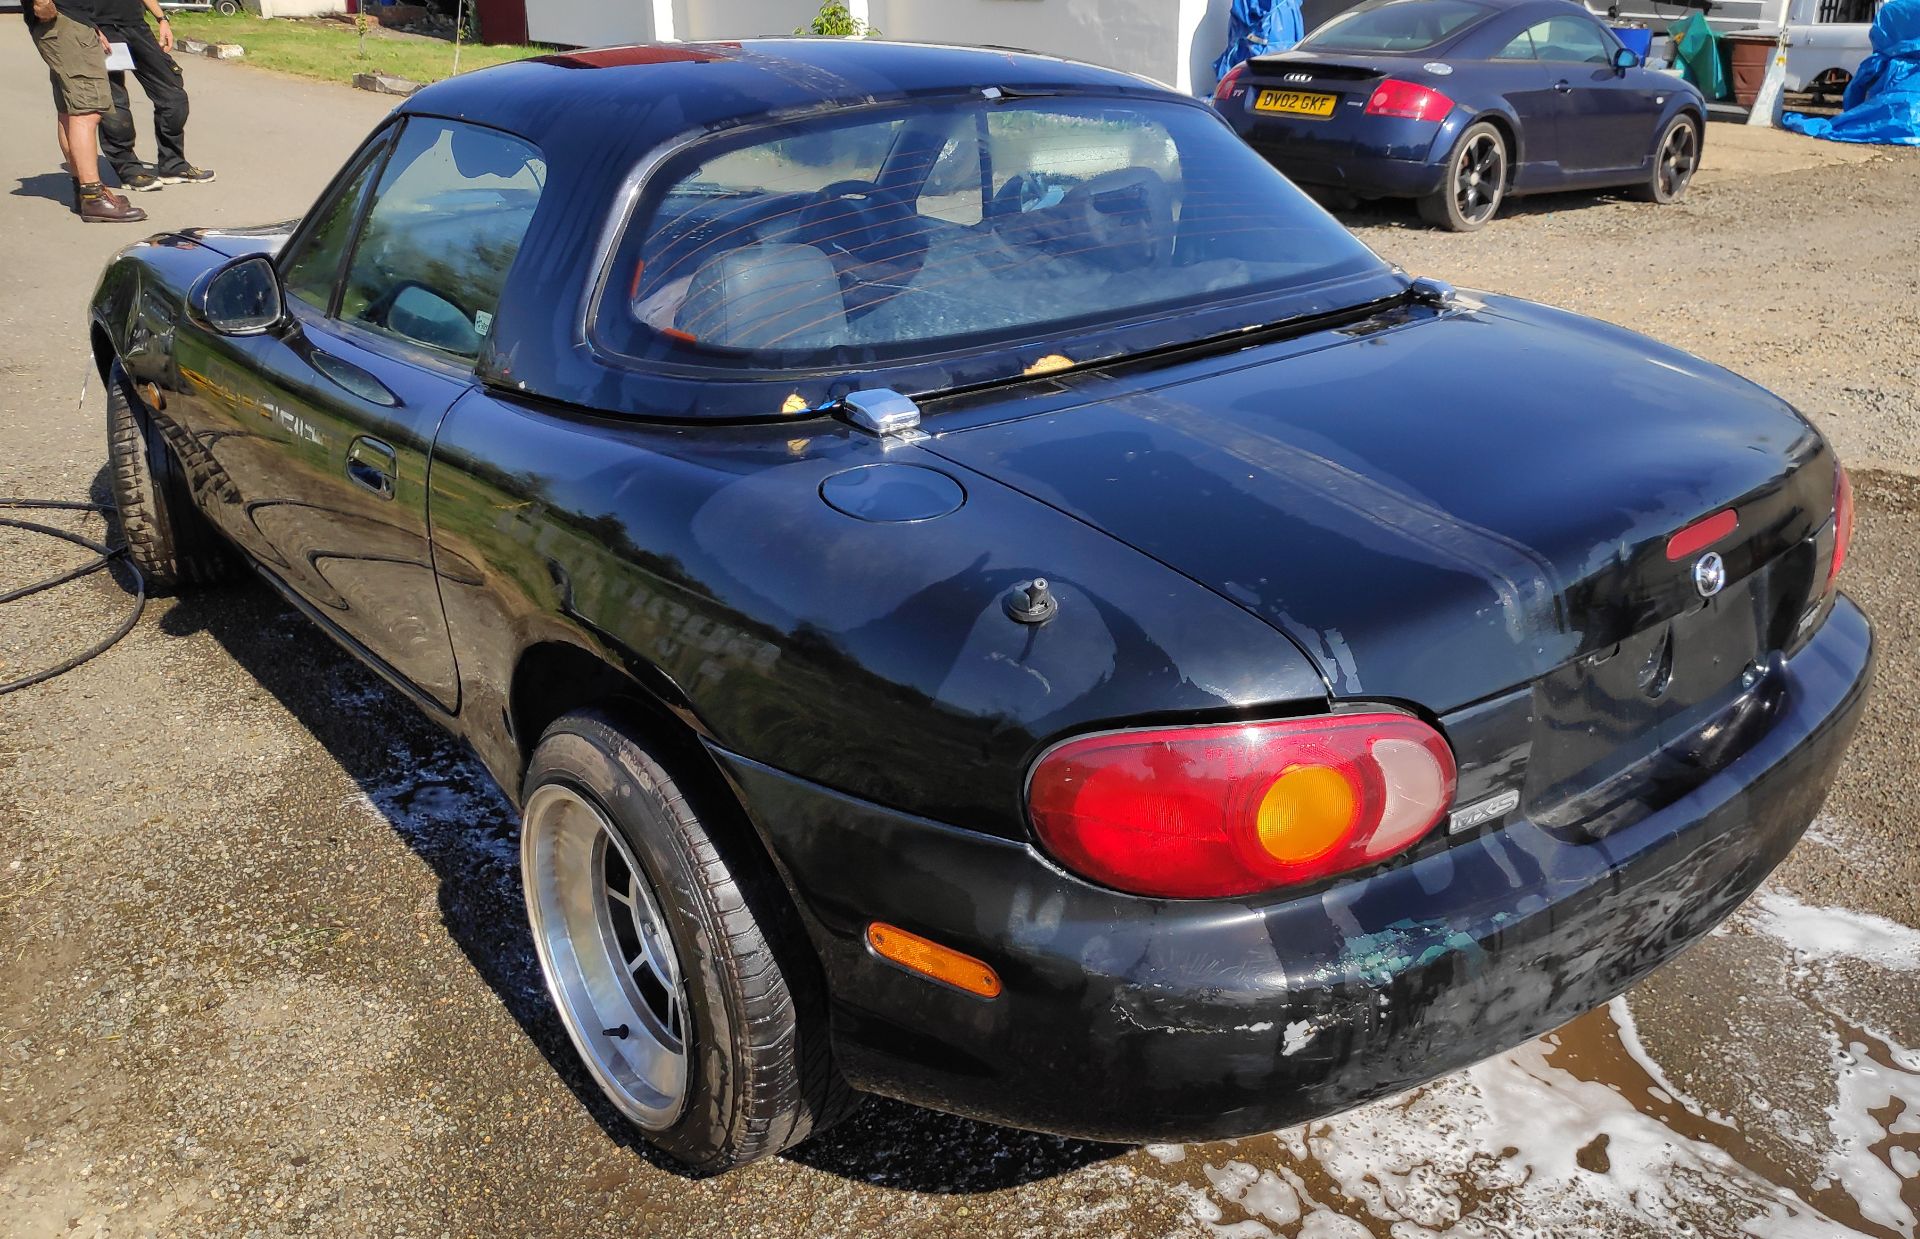 1 x 2000 Mazda MX5 Mk2 Drift Car - Includes 3 Extra Wheels/Tyres - Ref: T4 - CL682 - Location: Bedfo - Image 5 of 77